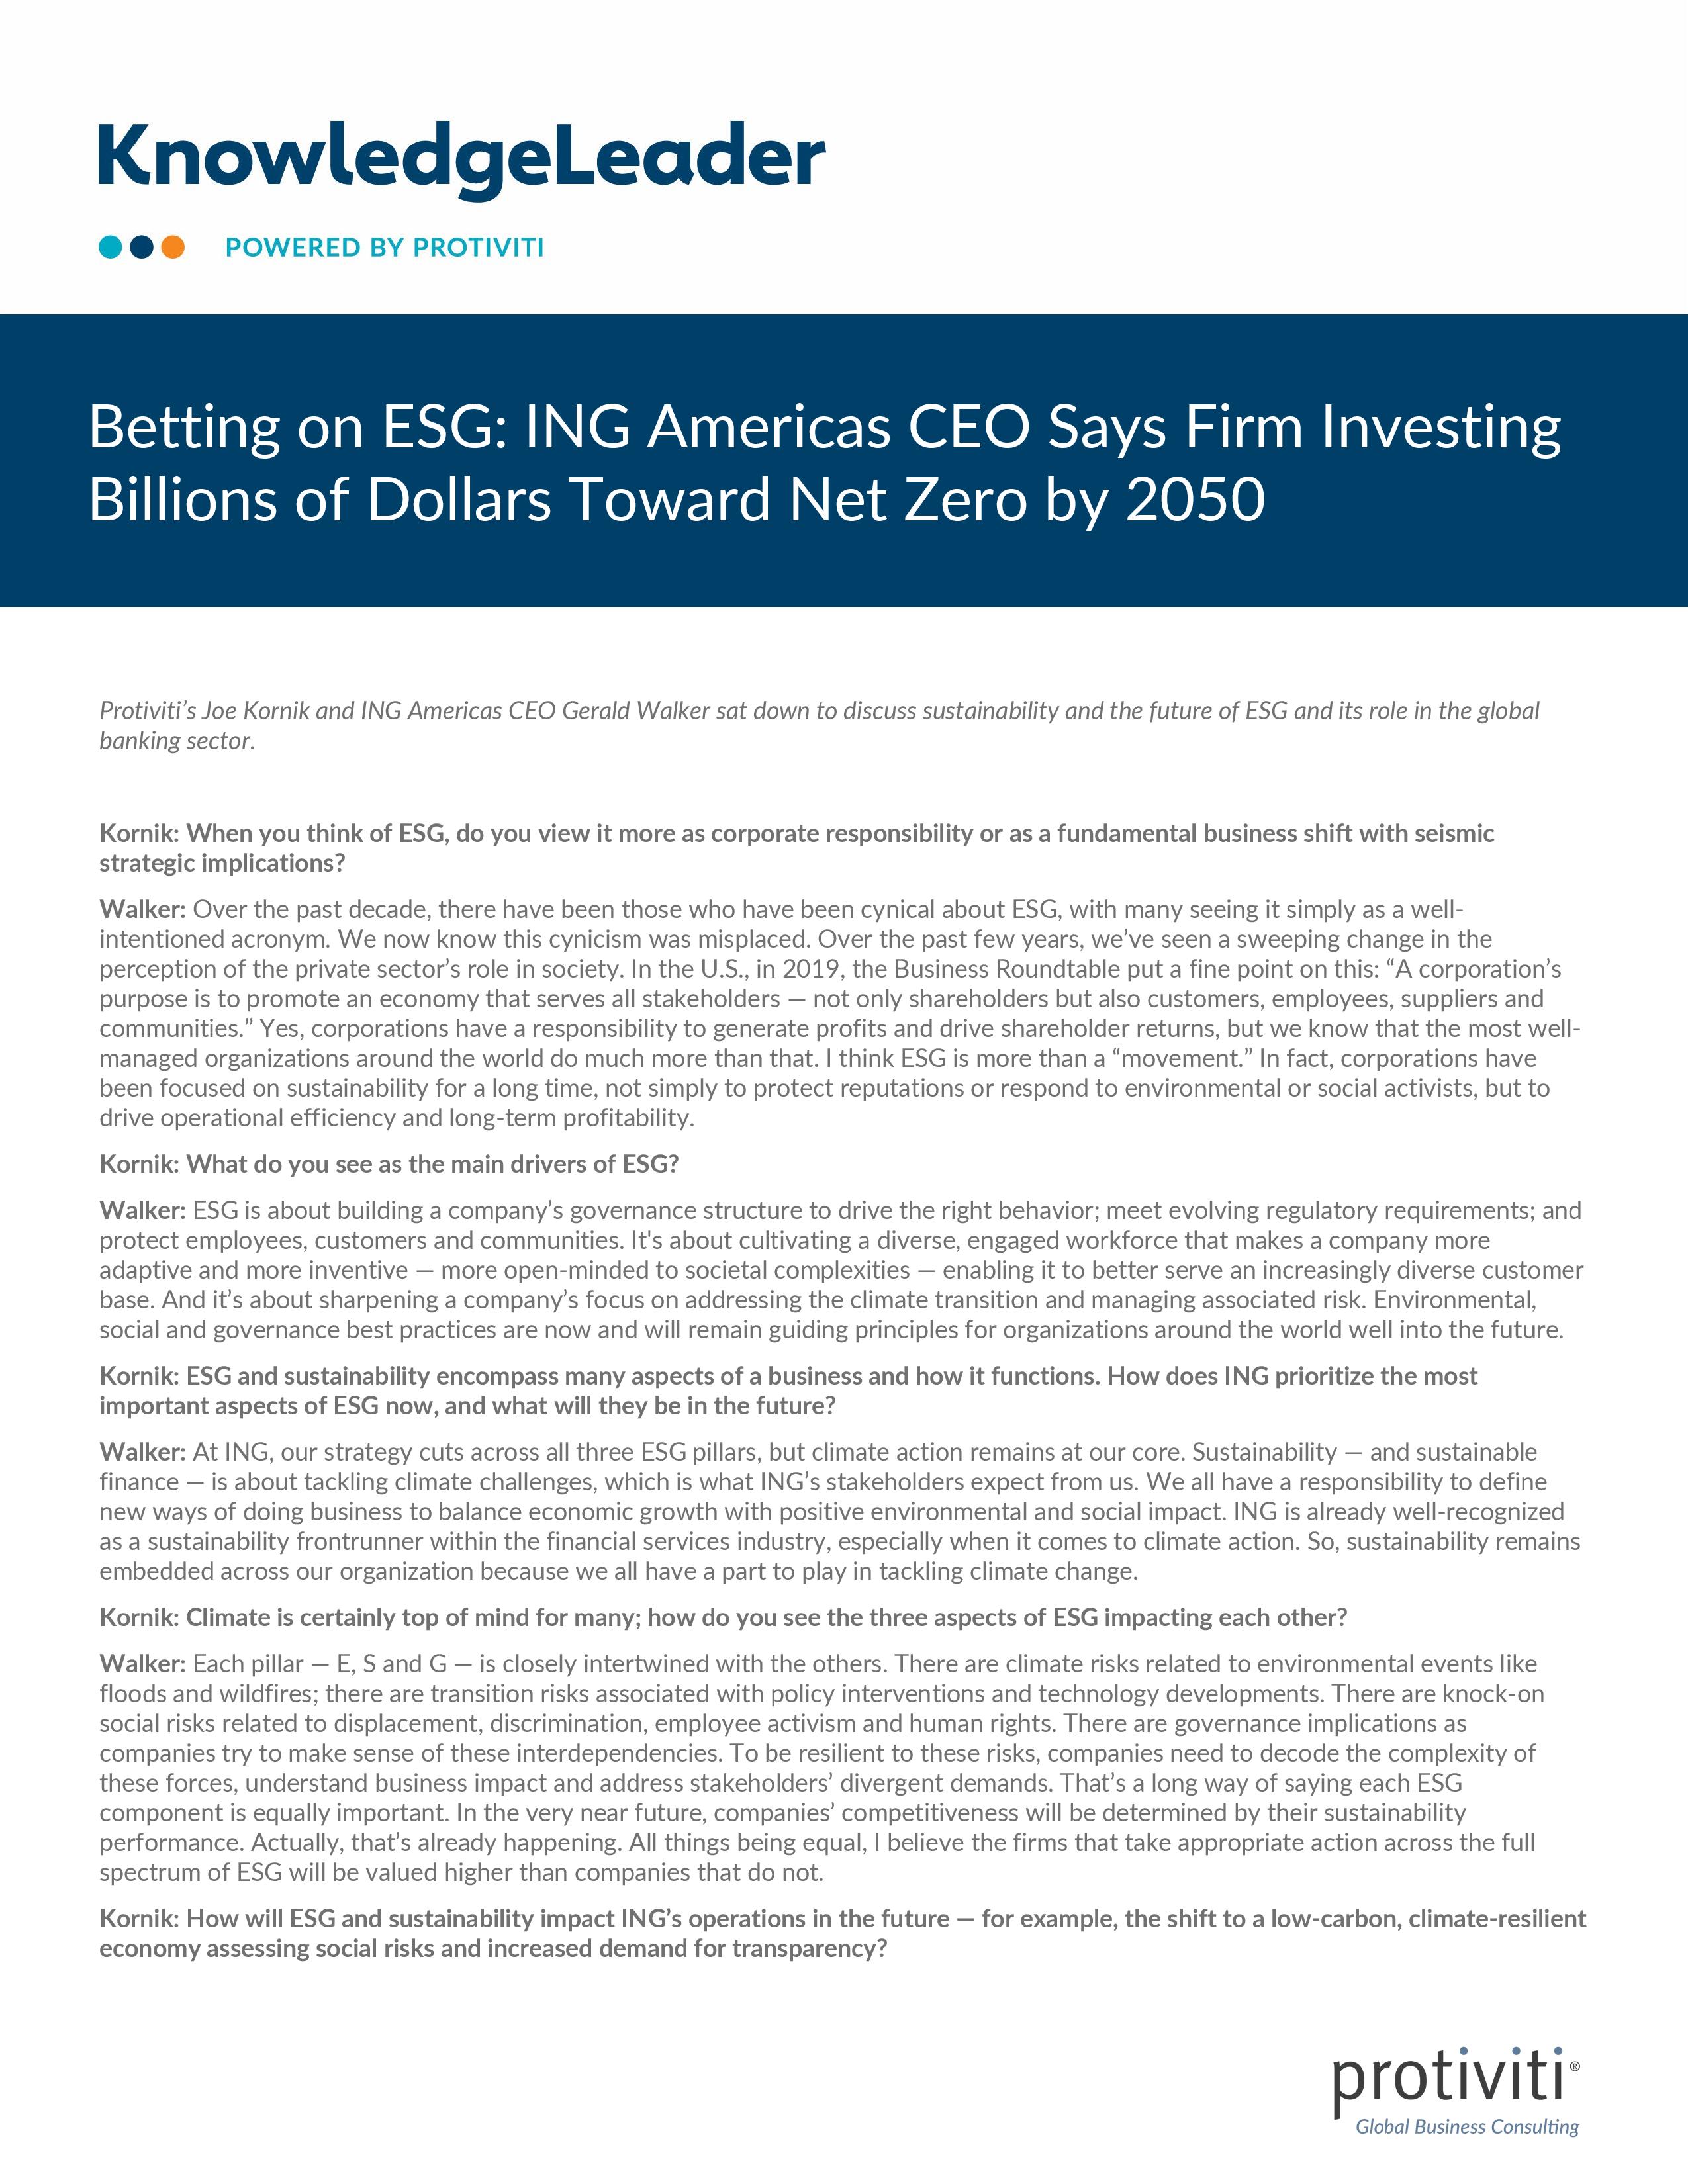 Screenshot of the First Page of Betting on ESG ING Americas CEO Says Firm Investing Billions of Dollars Toward Net Zero by 2050